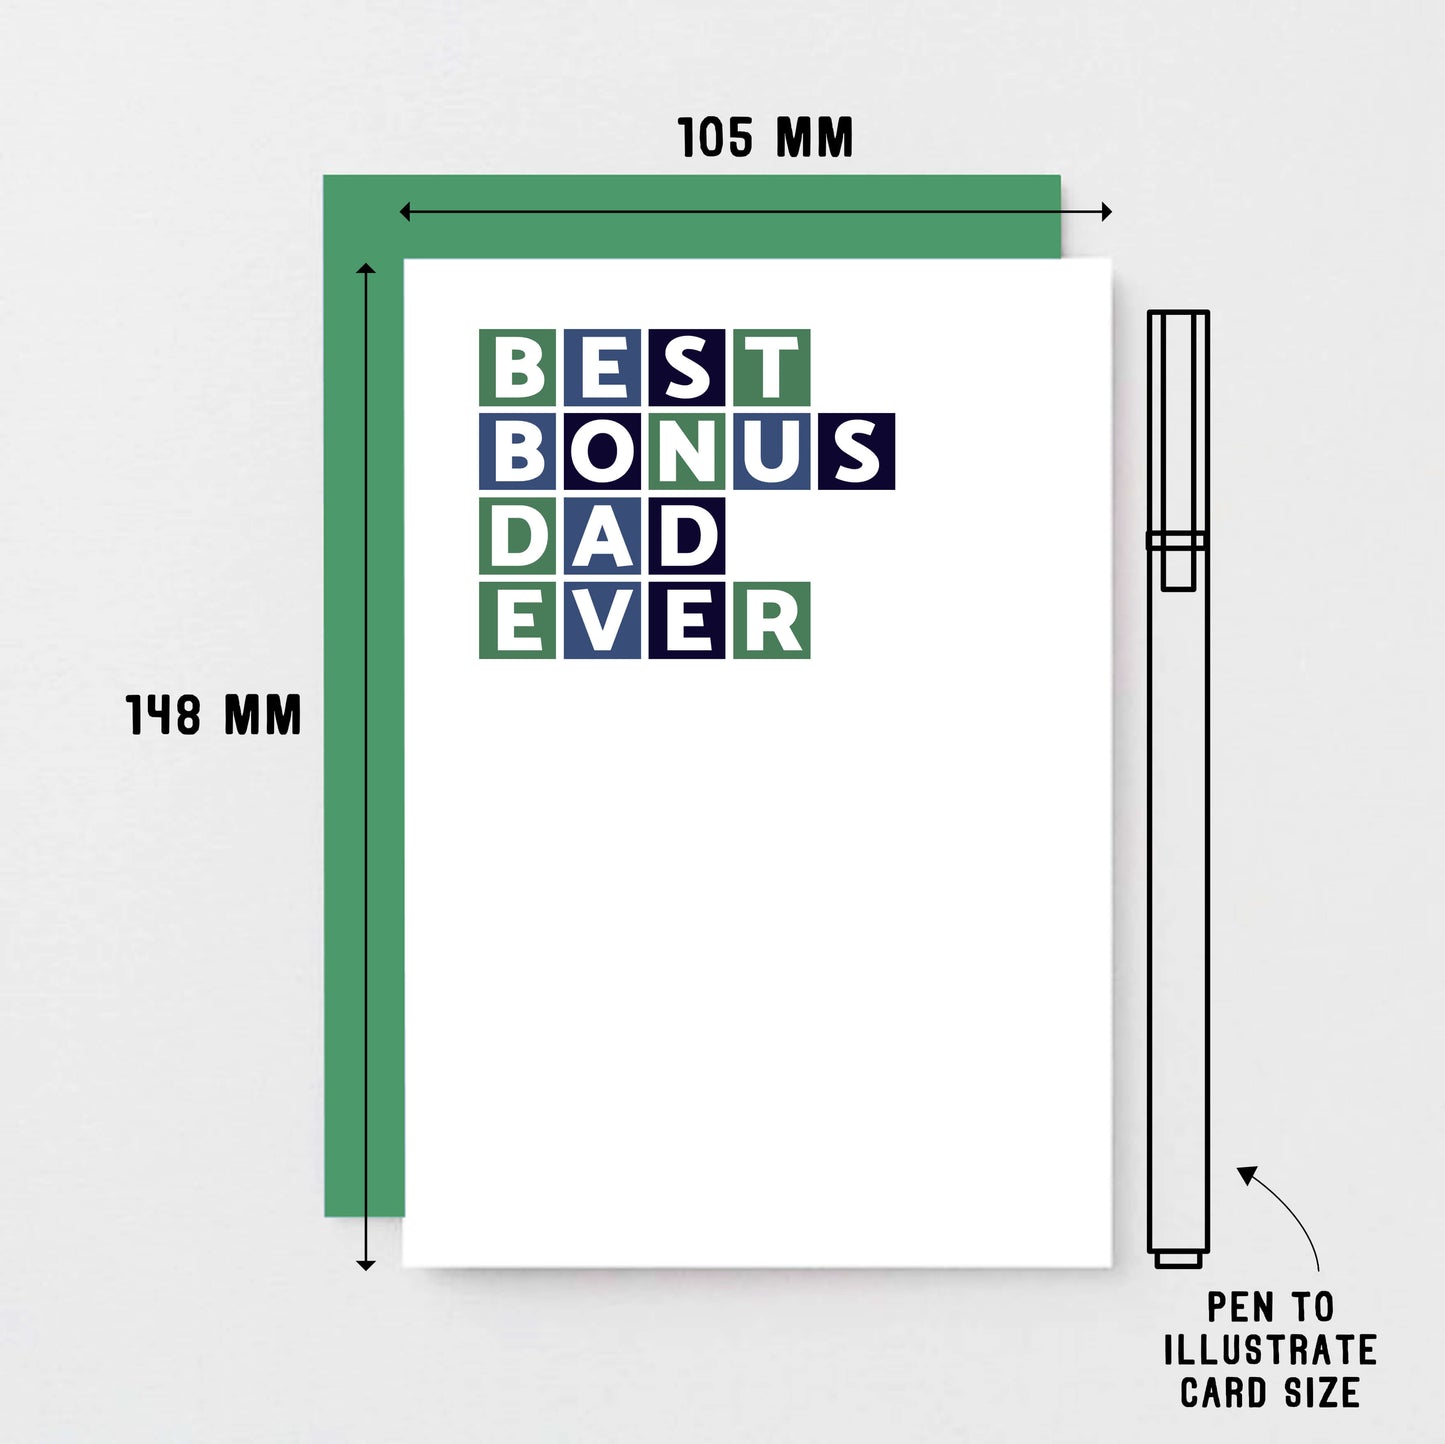 Best Bonus Dad Ever Card by SixElevenCreations. Product Code SE0327A6